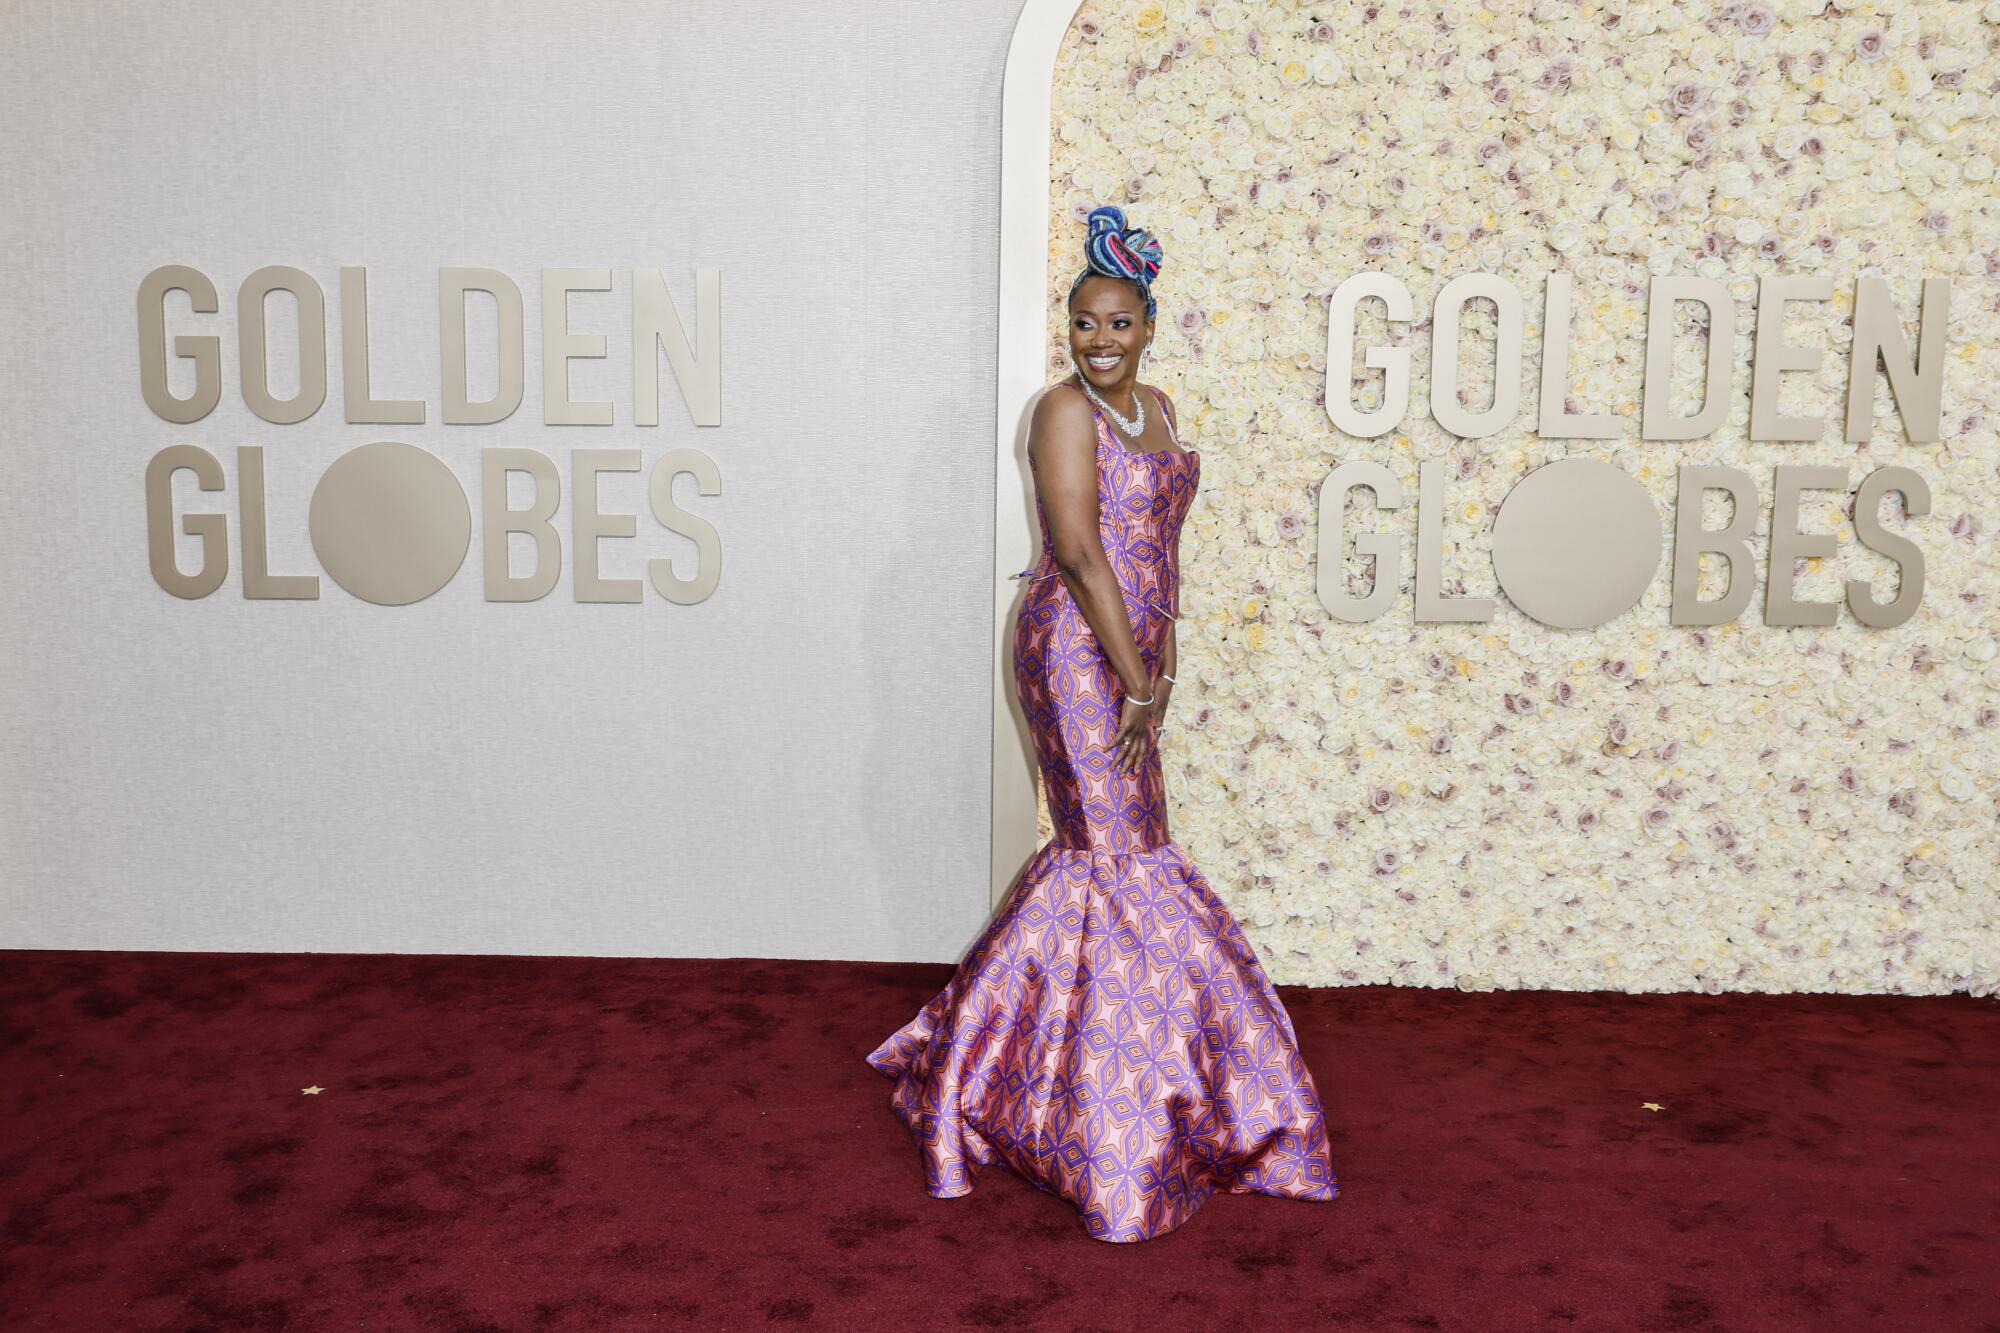 Erika Alexander attends the 81st Golden Globe Awards held at the Beverly Hilton